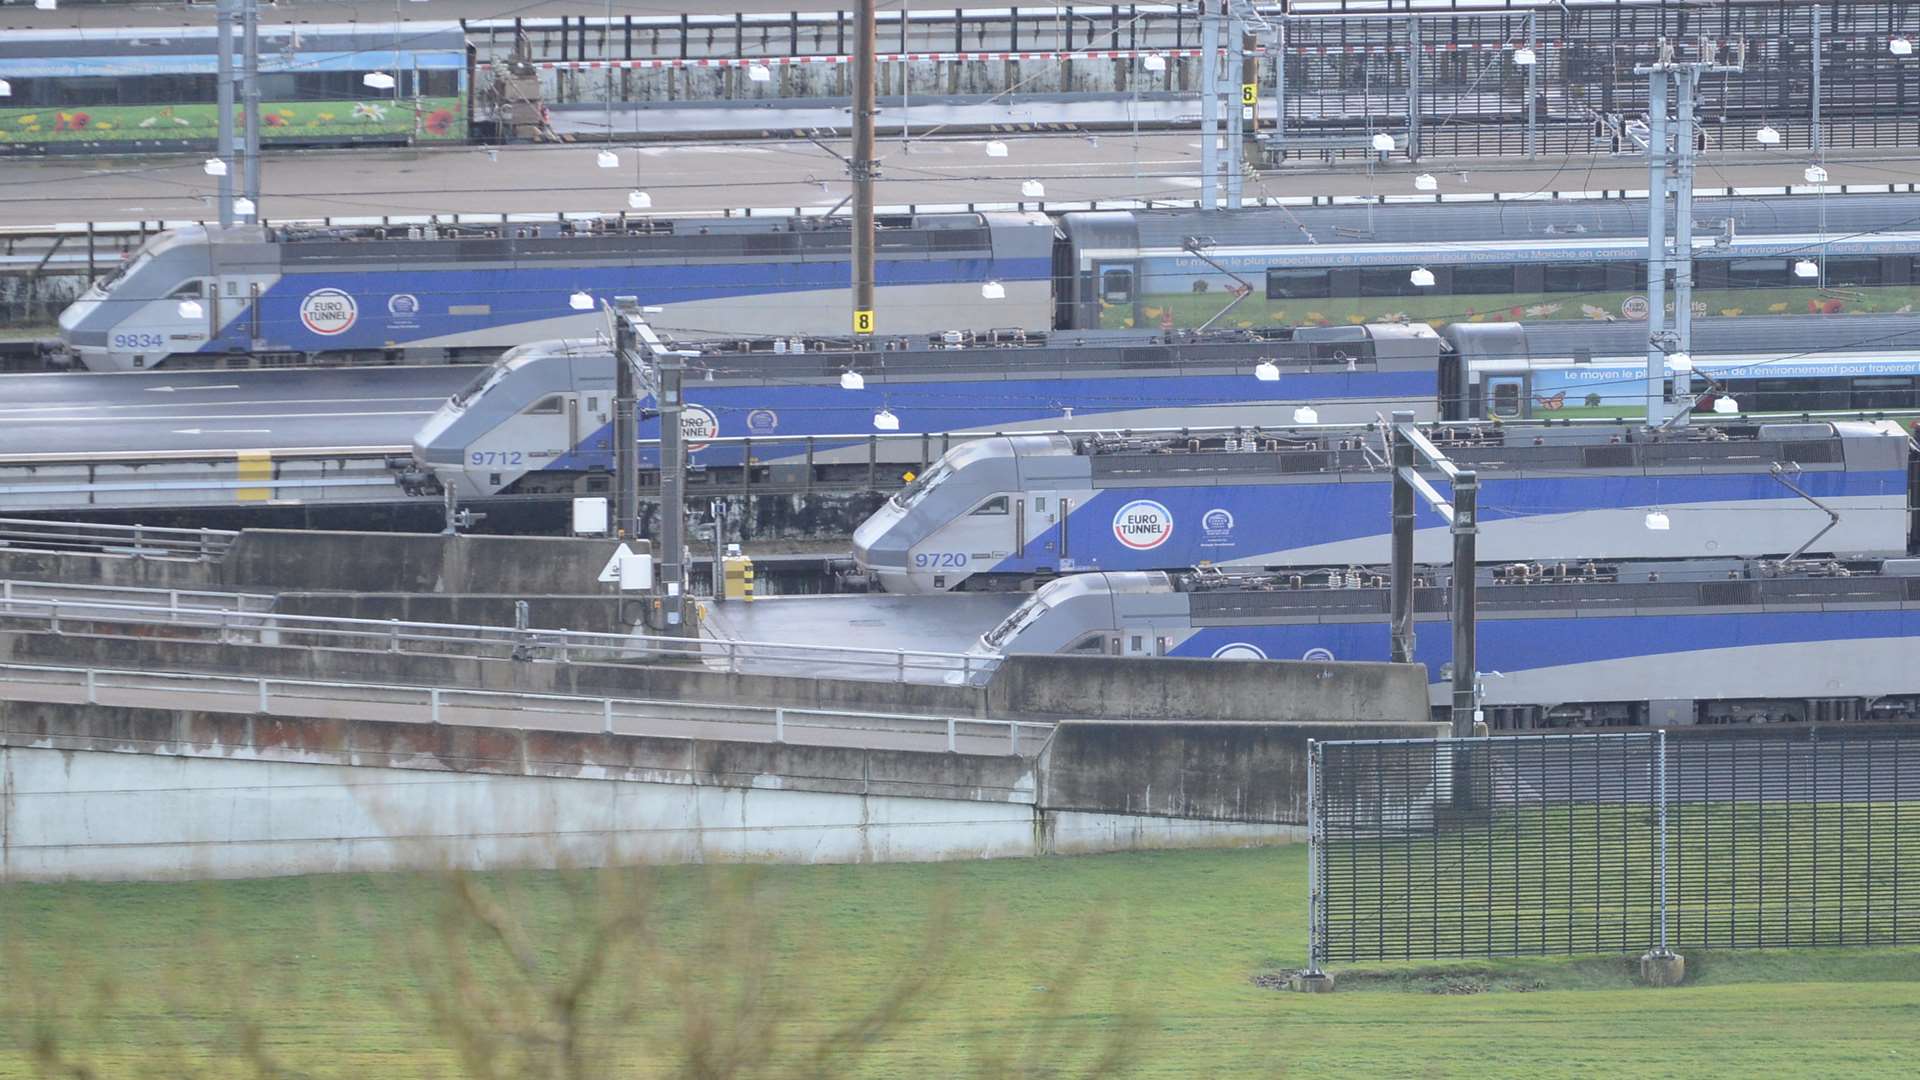 Eurotunnel has broken its truck traffic records for 12 straight months